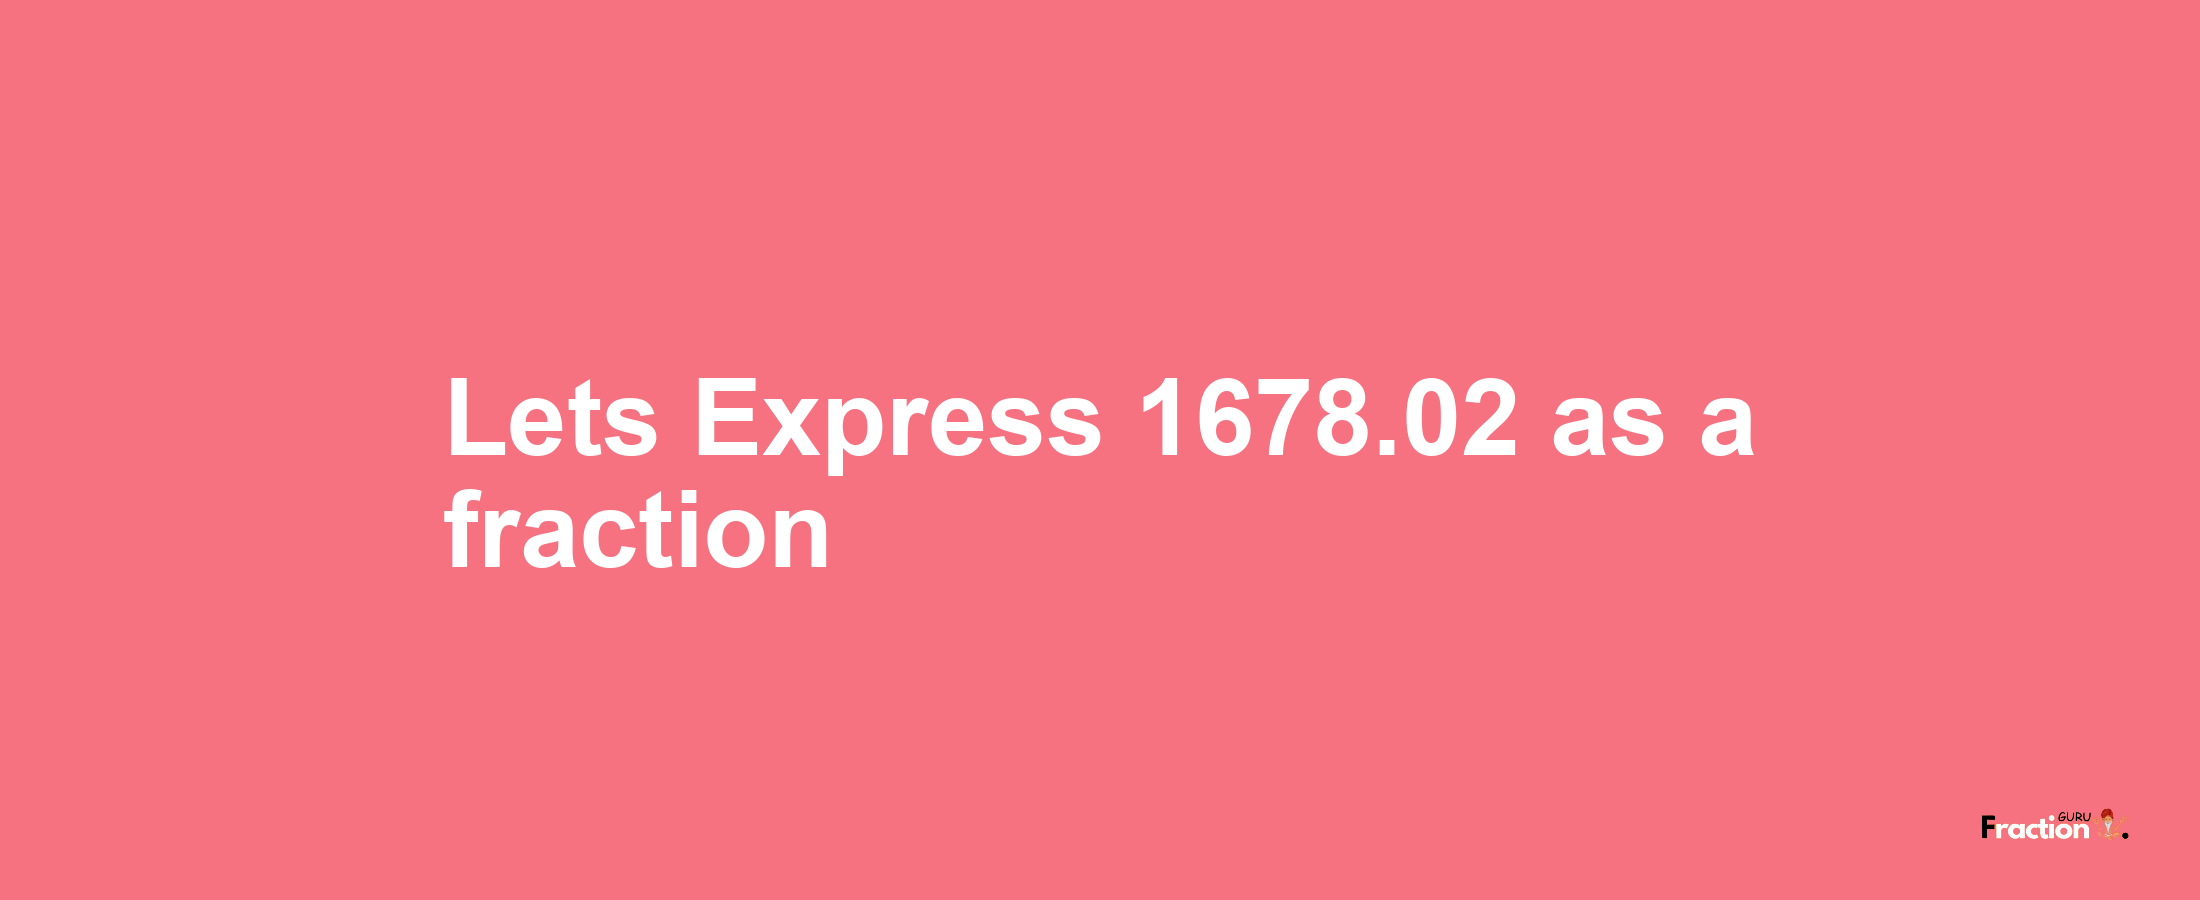 Lets Express 1678.02 as afraction